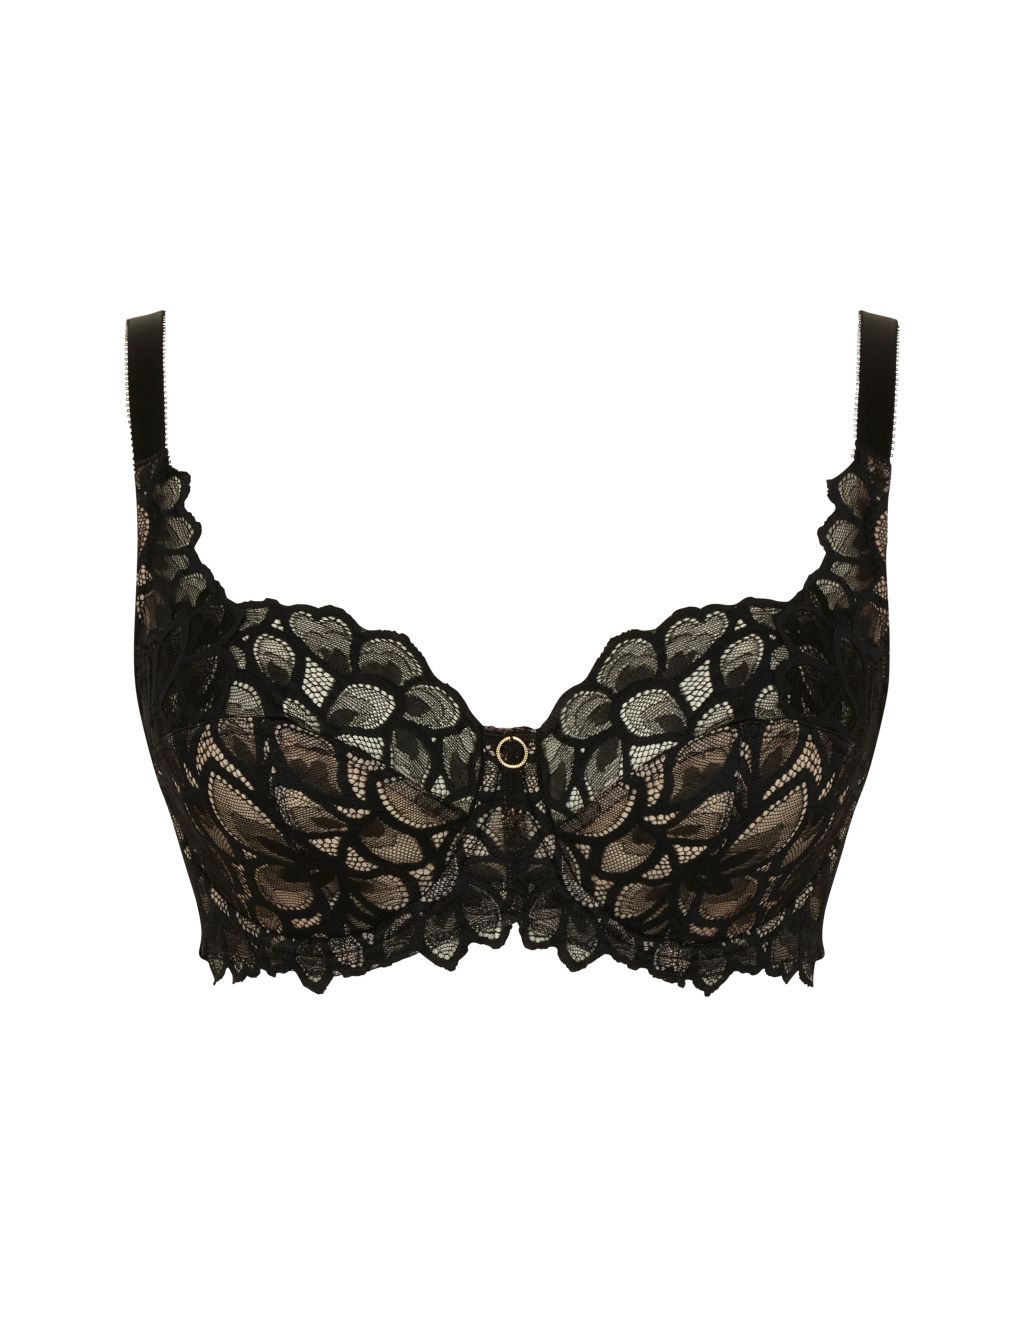 Allure Lace Wired Full Cup Bra D-J image 2